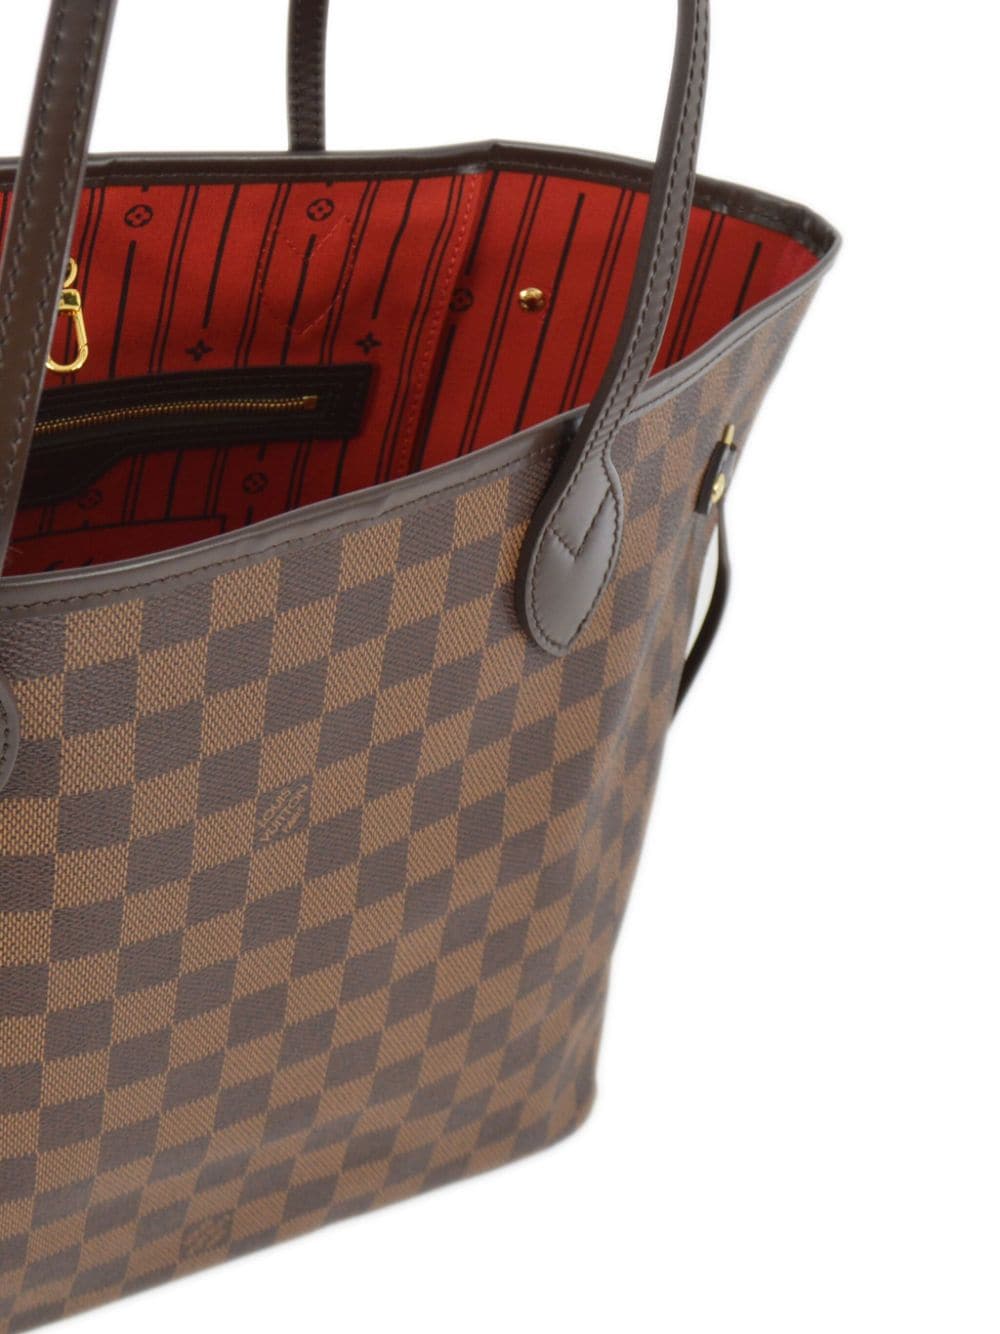 Pre-owned Louis Vuitton Neverfull Mm 手提包（2013年典藏款） In Brown